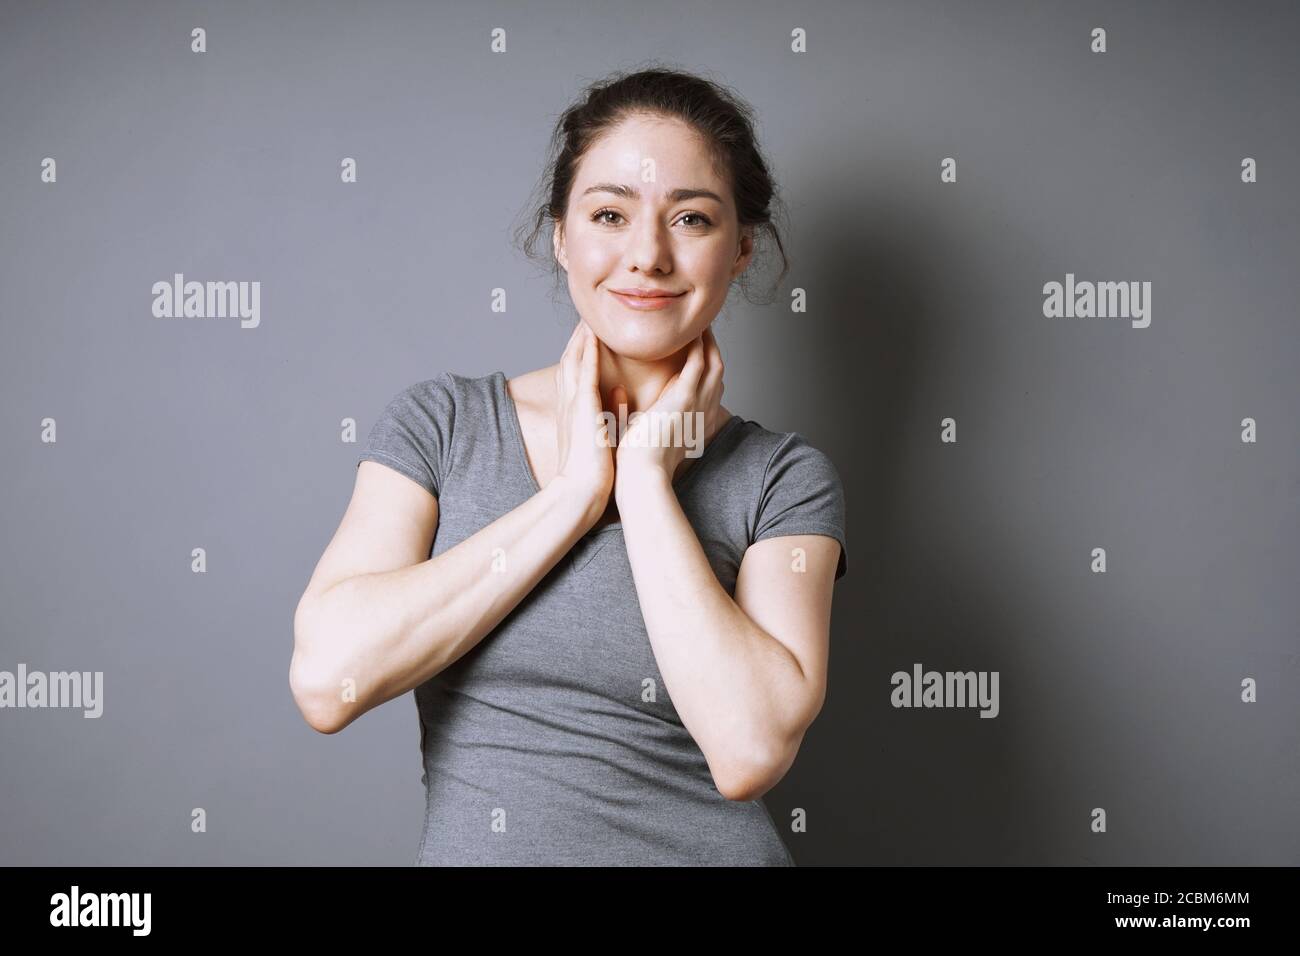 happy young woman with a satisfied smile on her face against gray background with copy space Stock Photo